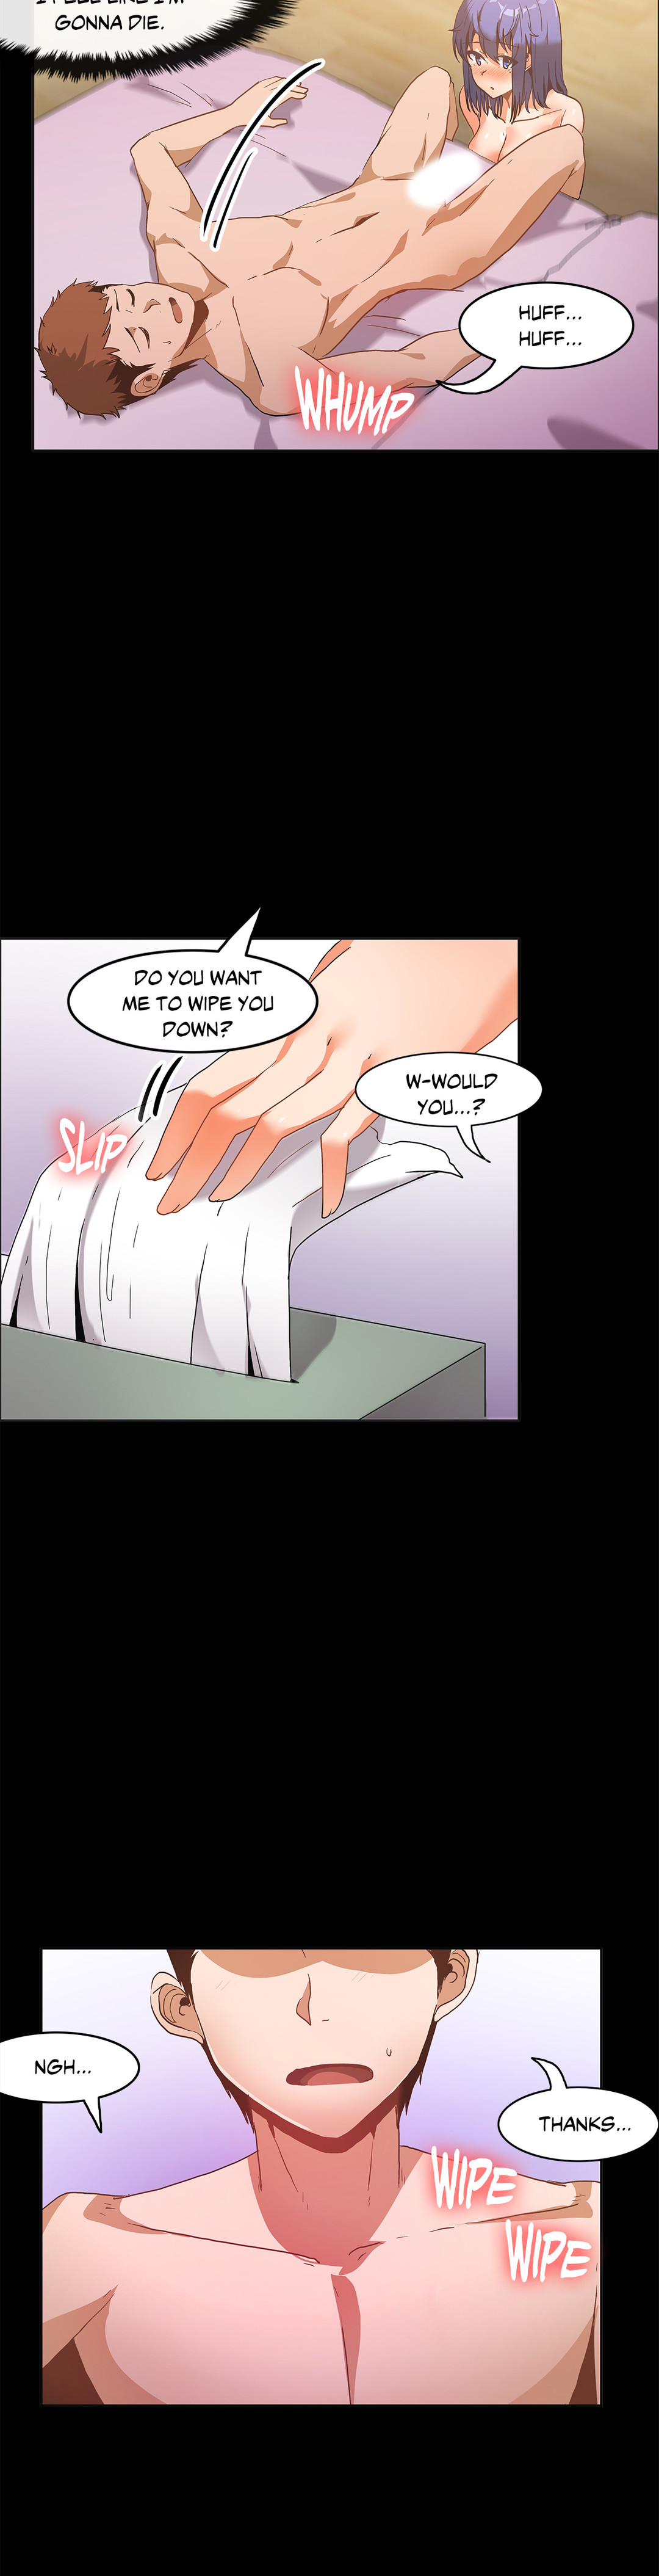 The Girl That Wet the Wall Ch 51 - 55 page 14 full